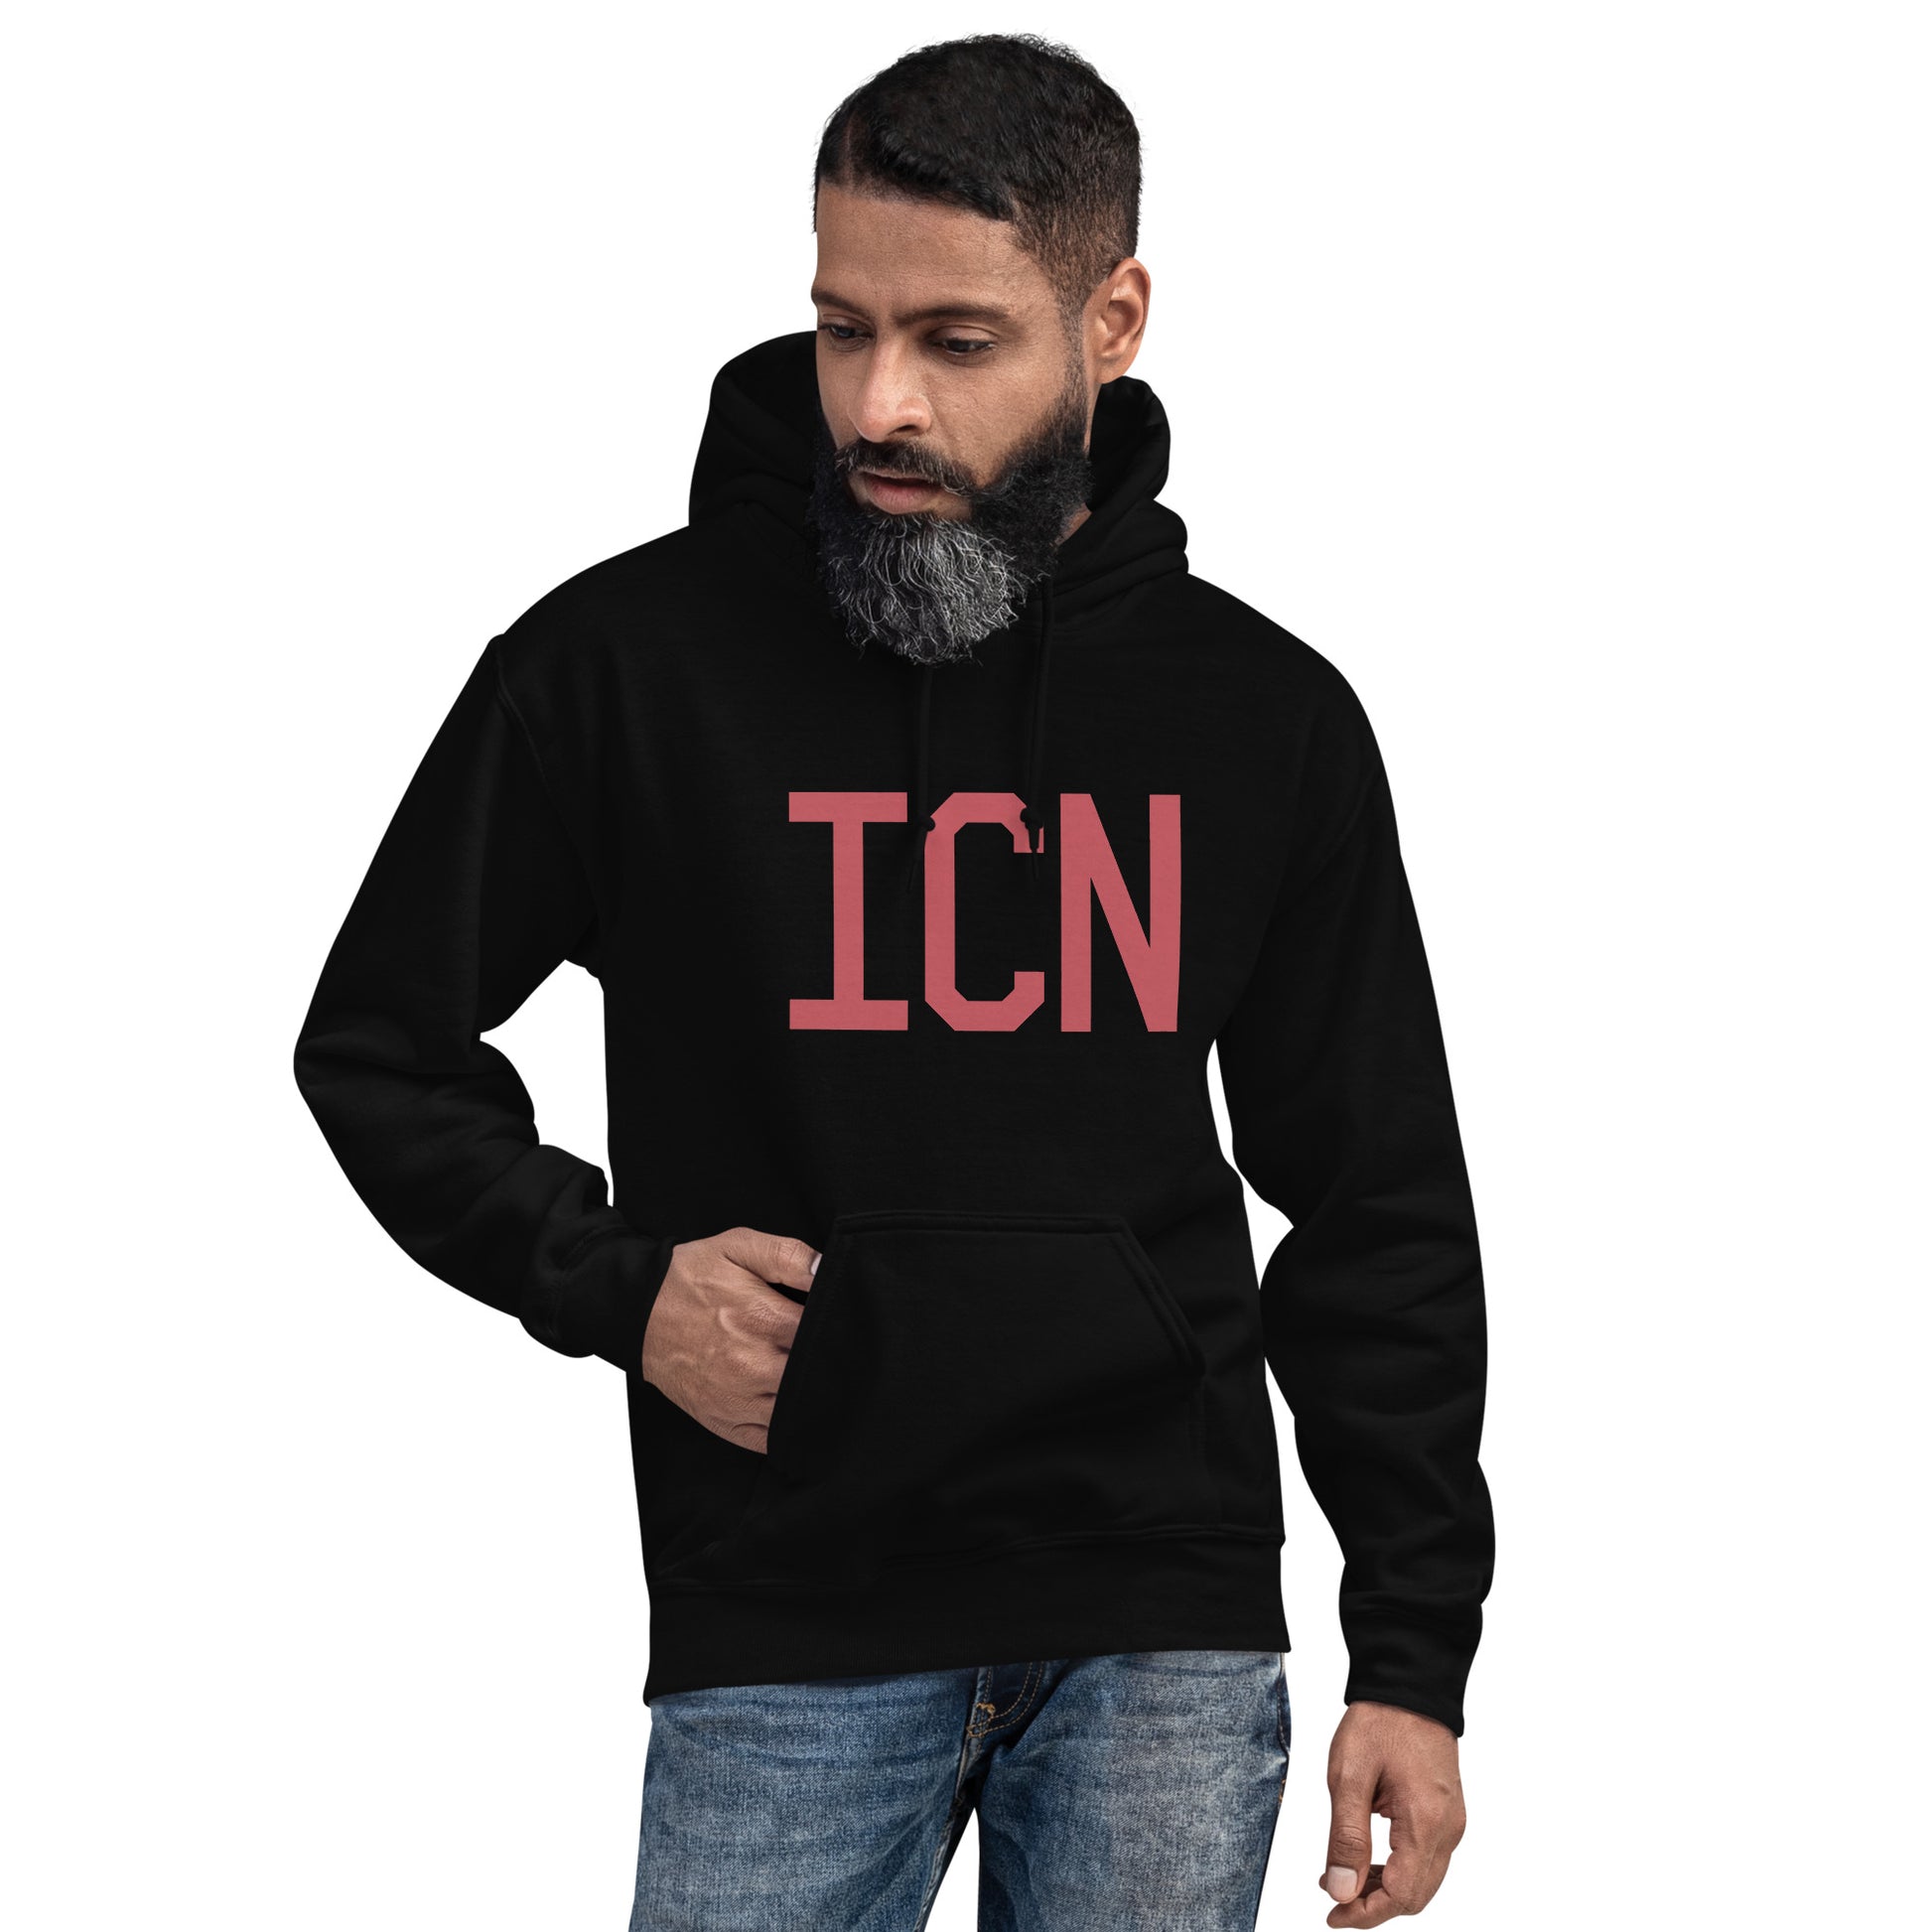 Aviation Enthusiast Hoodie - Deep Pink Graphic • ICN Seoul • YHM Designs - Image 05